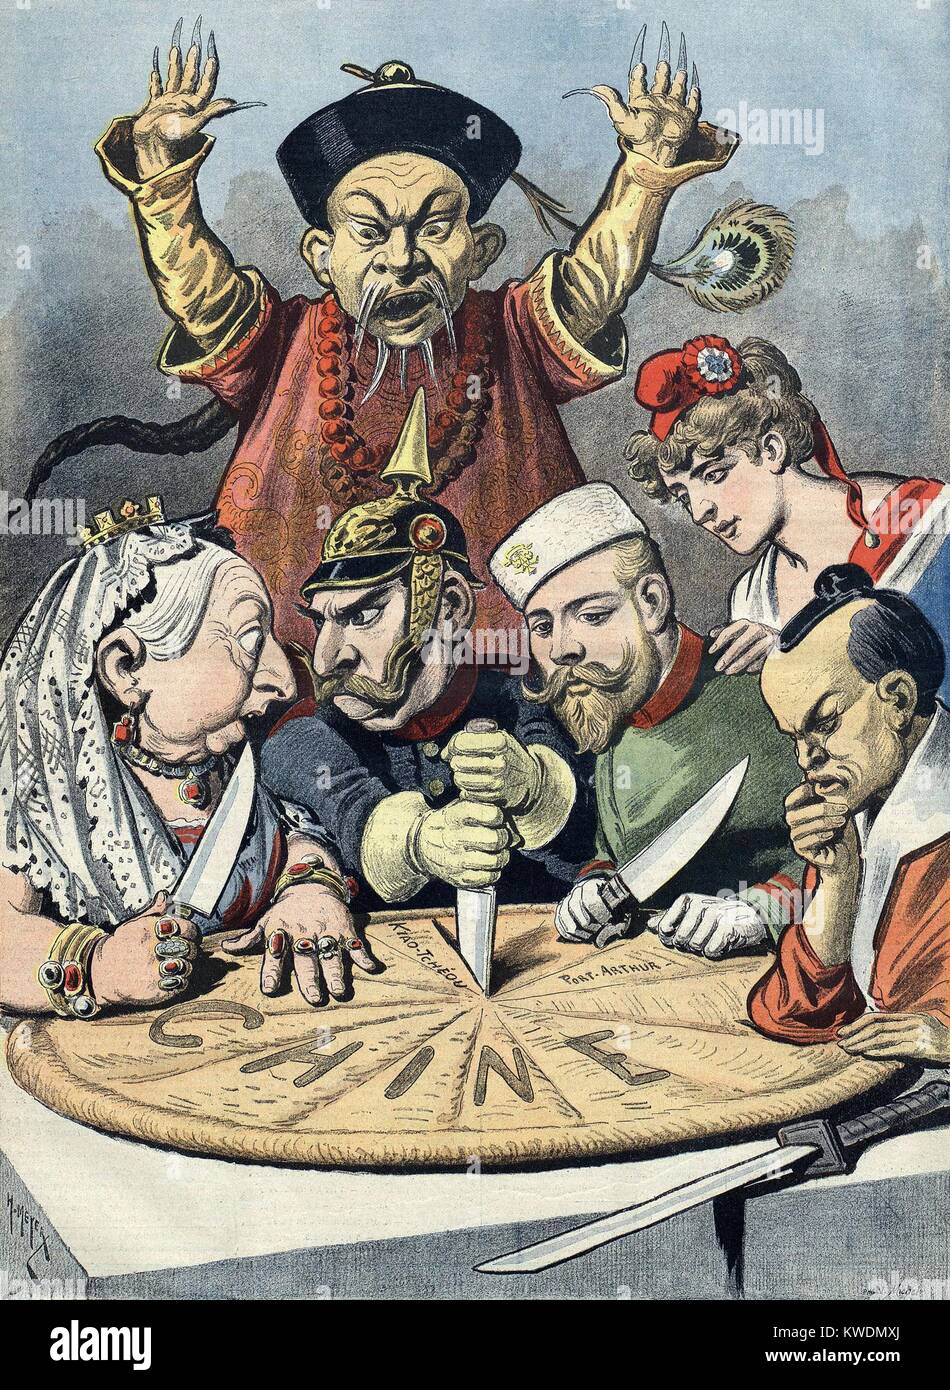 1898 French political cartoon shows Europeans carving up China. Behind them an agitated Mandarin is helpless to stop them. L-R: Queen Victoria, Kaiser Wilhelm II, Czar Nicolas II, and a Japanese samurai carve the Chinese Cake as French national symbol, Marianne watches  (BSLOC 2017 20 10) Stock Photo